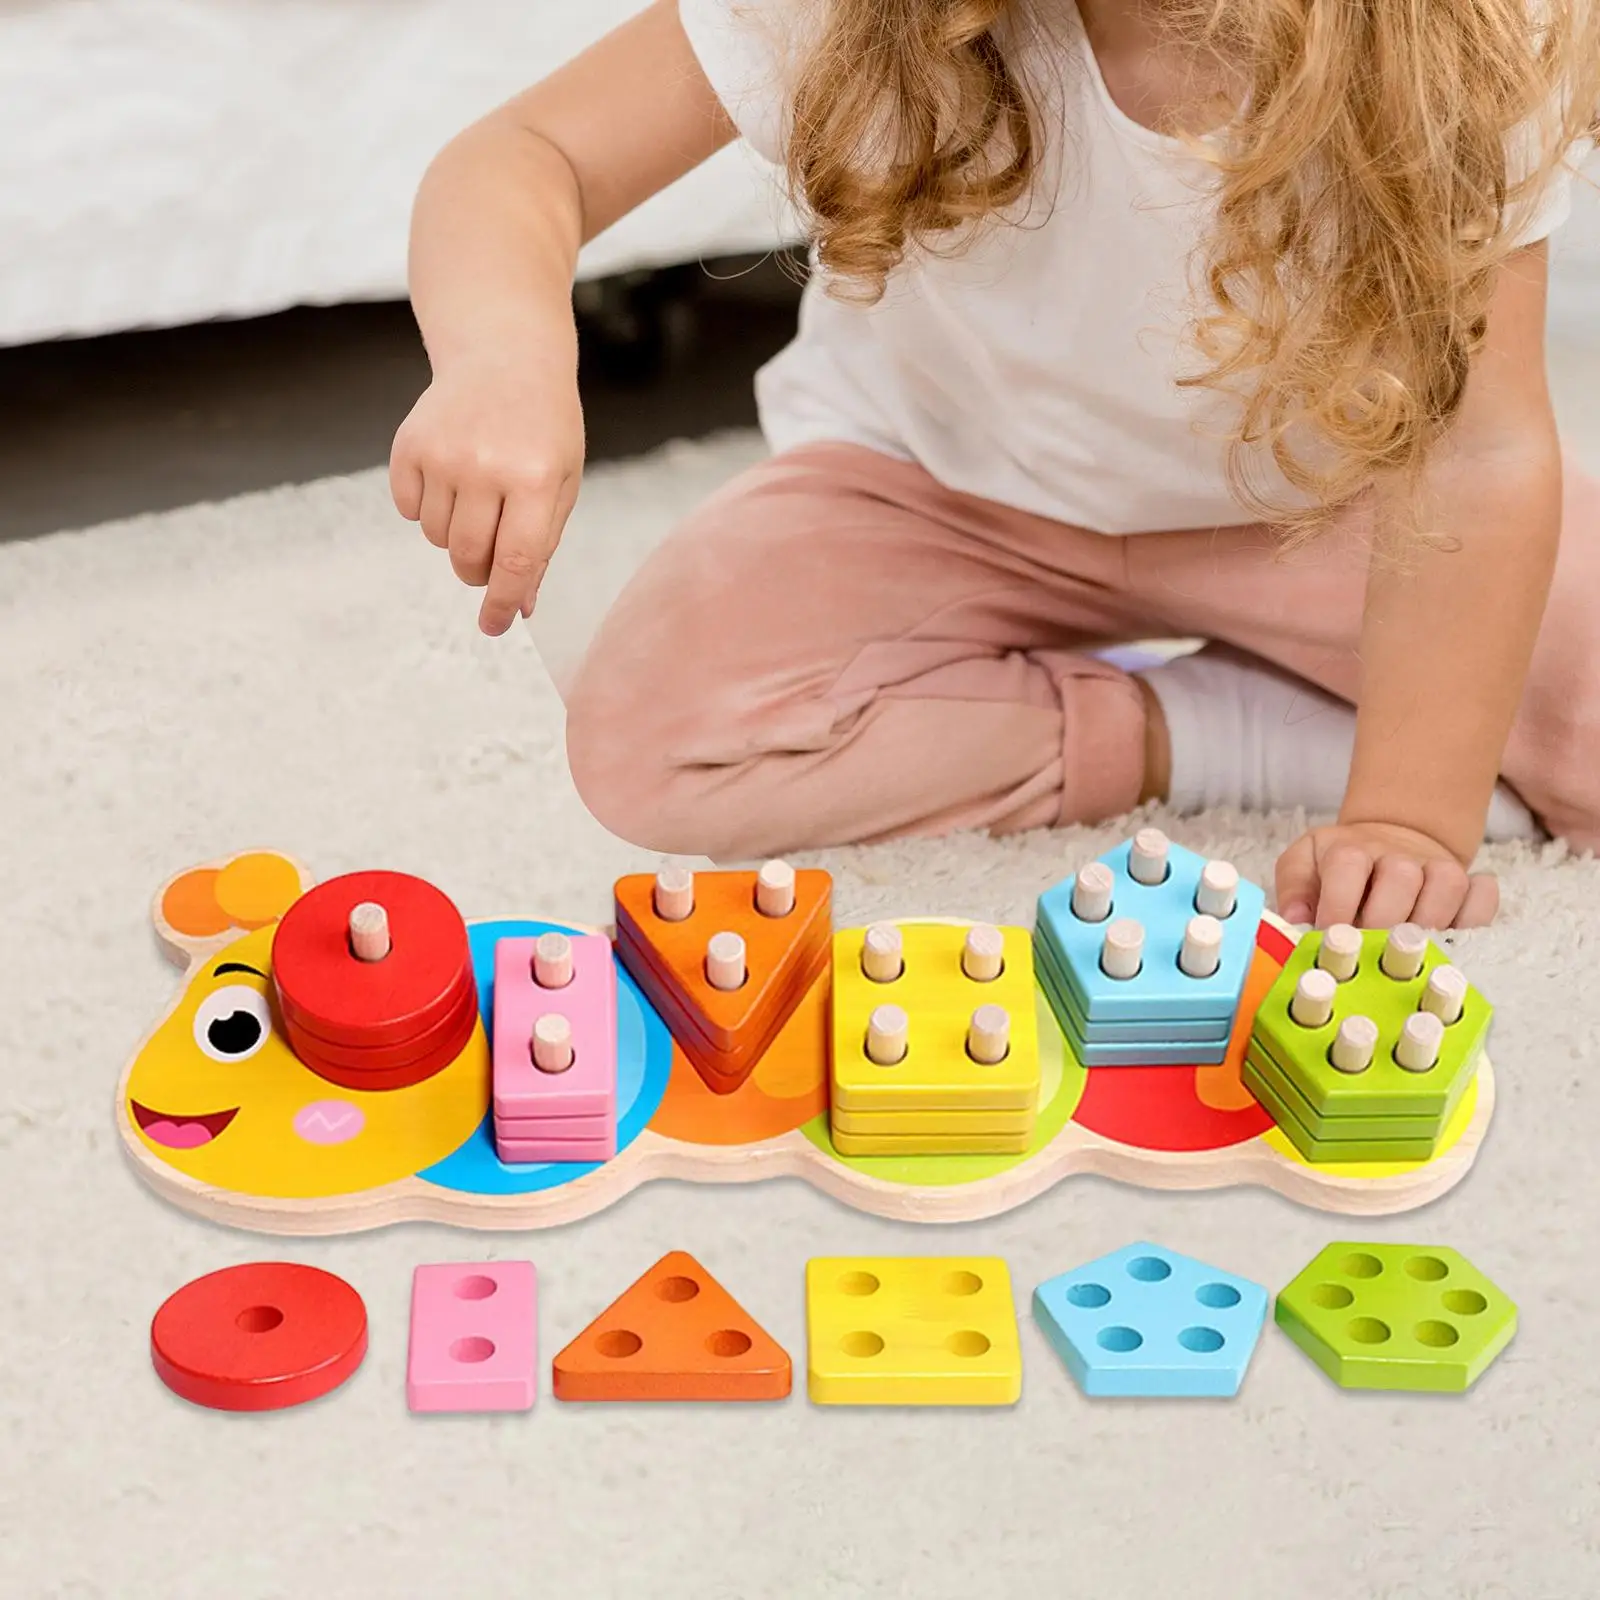 Montessori Shape Color Recognition Blocks Matching Puzzle Stacker Fine Motor Skill Wood Color Shape Sorting Board for Game Gift